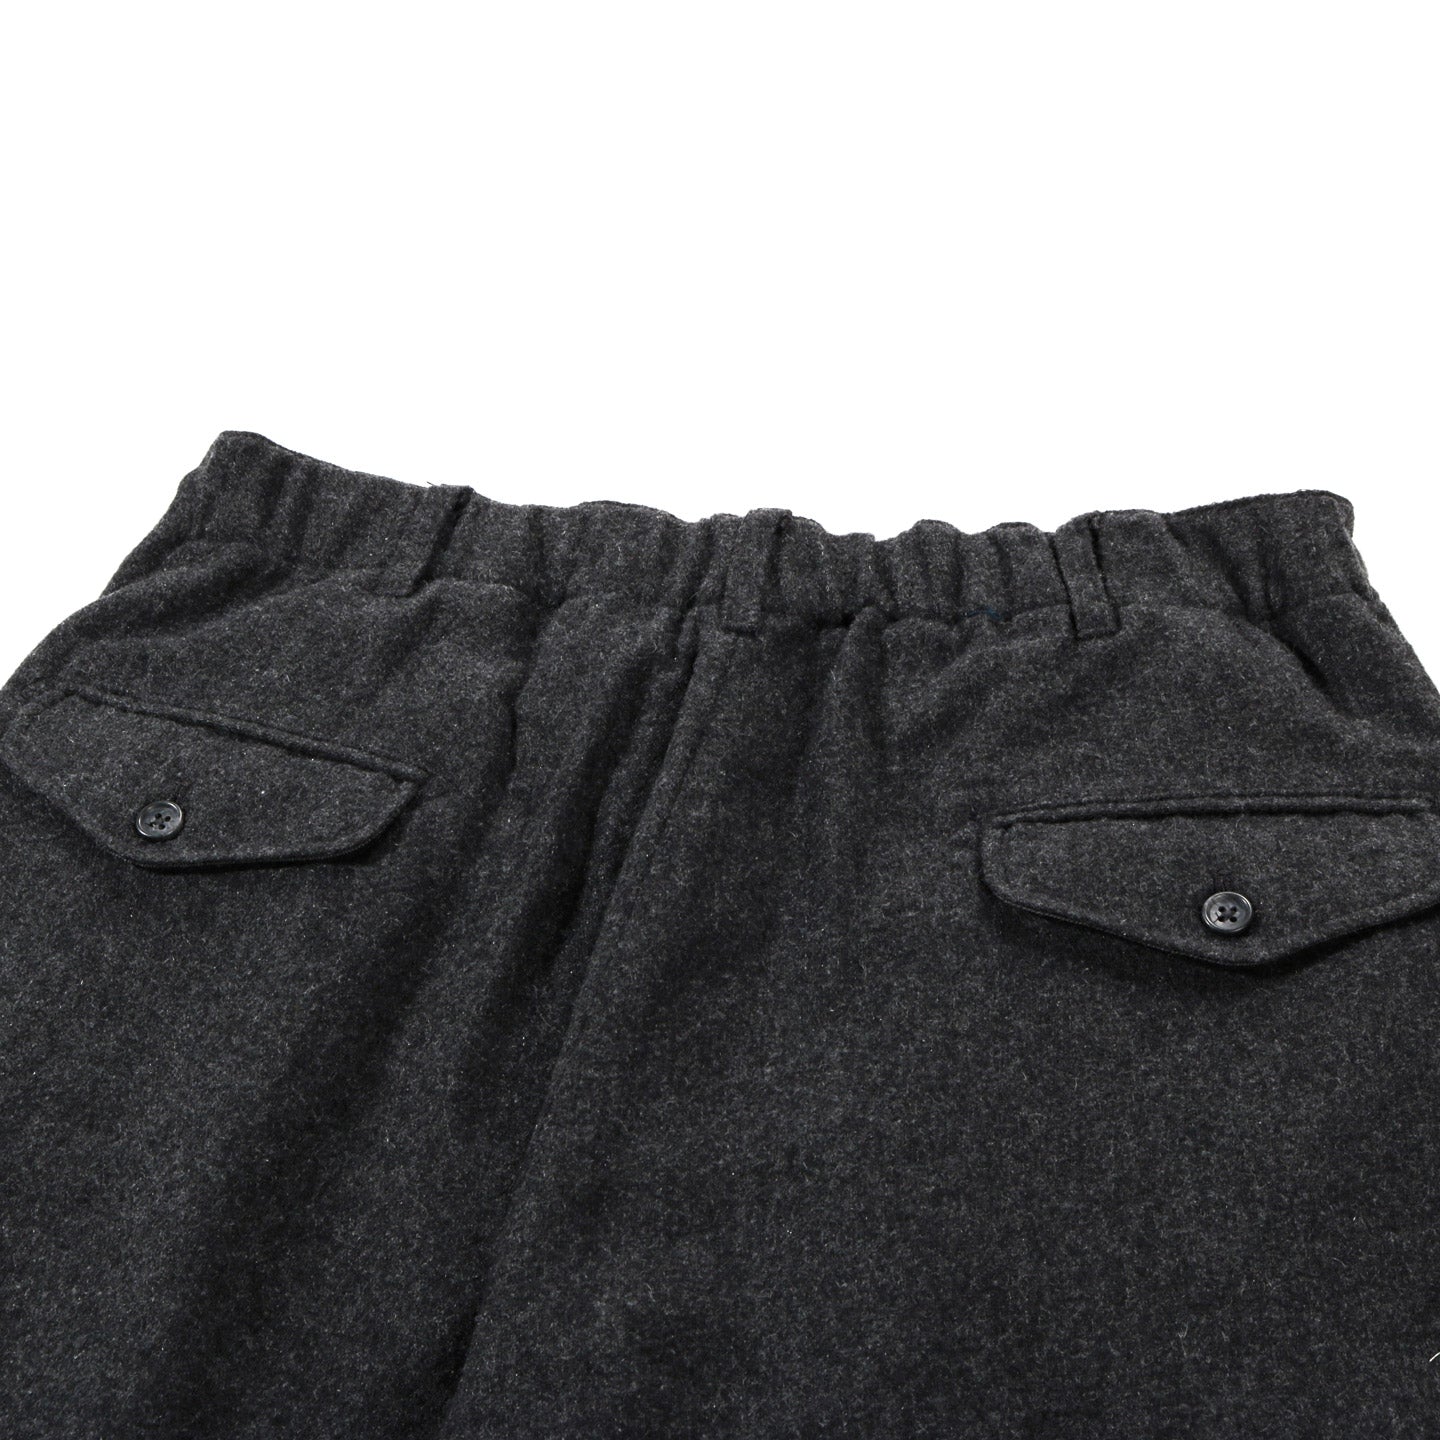 ENGINEERED GARMENTS OXFORD PANT GREY SOLID POLY WOOL FLANNEL